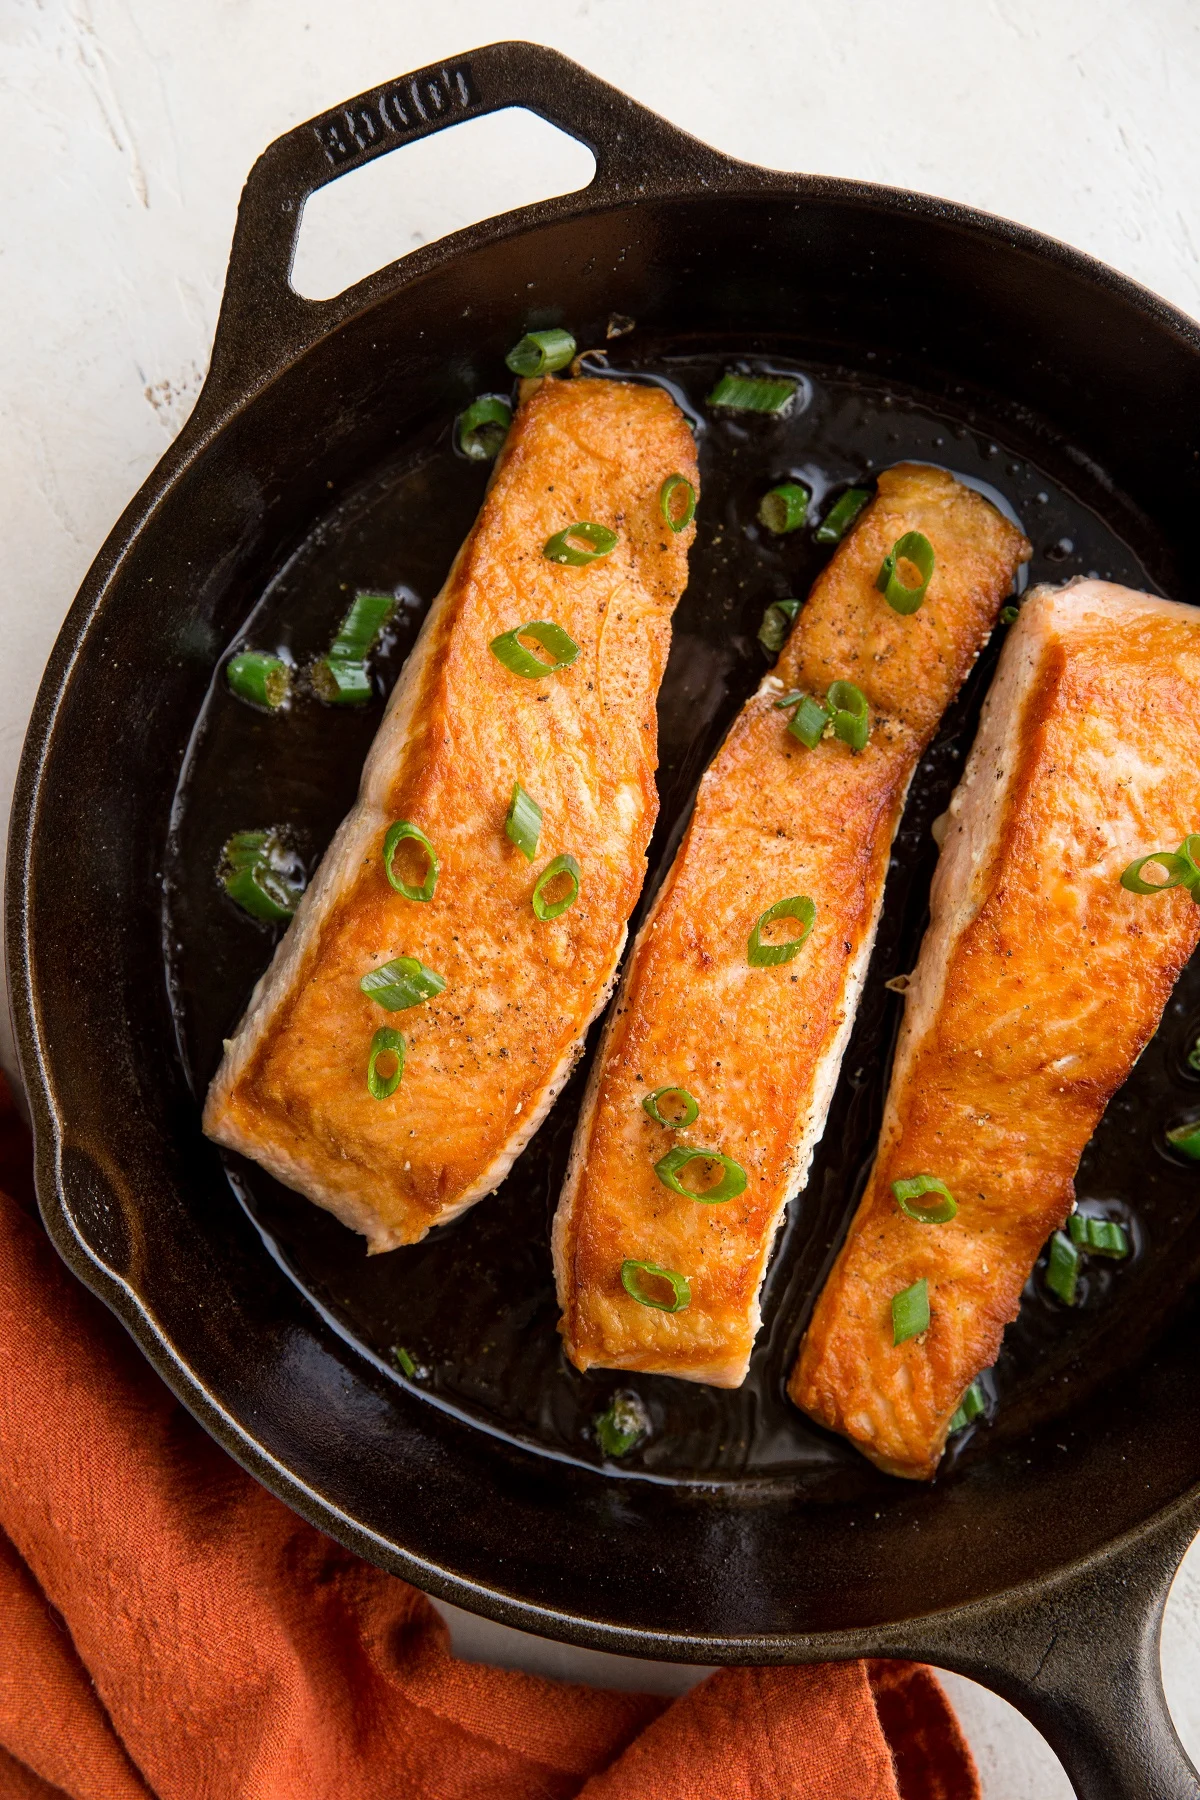 Top down photo of a cast iron skillet with three crispy salmon filets inside, green onion on top and a red napkin off to the side